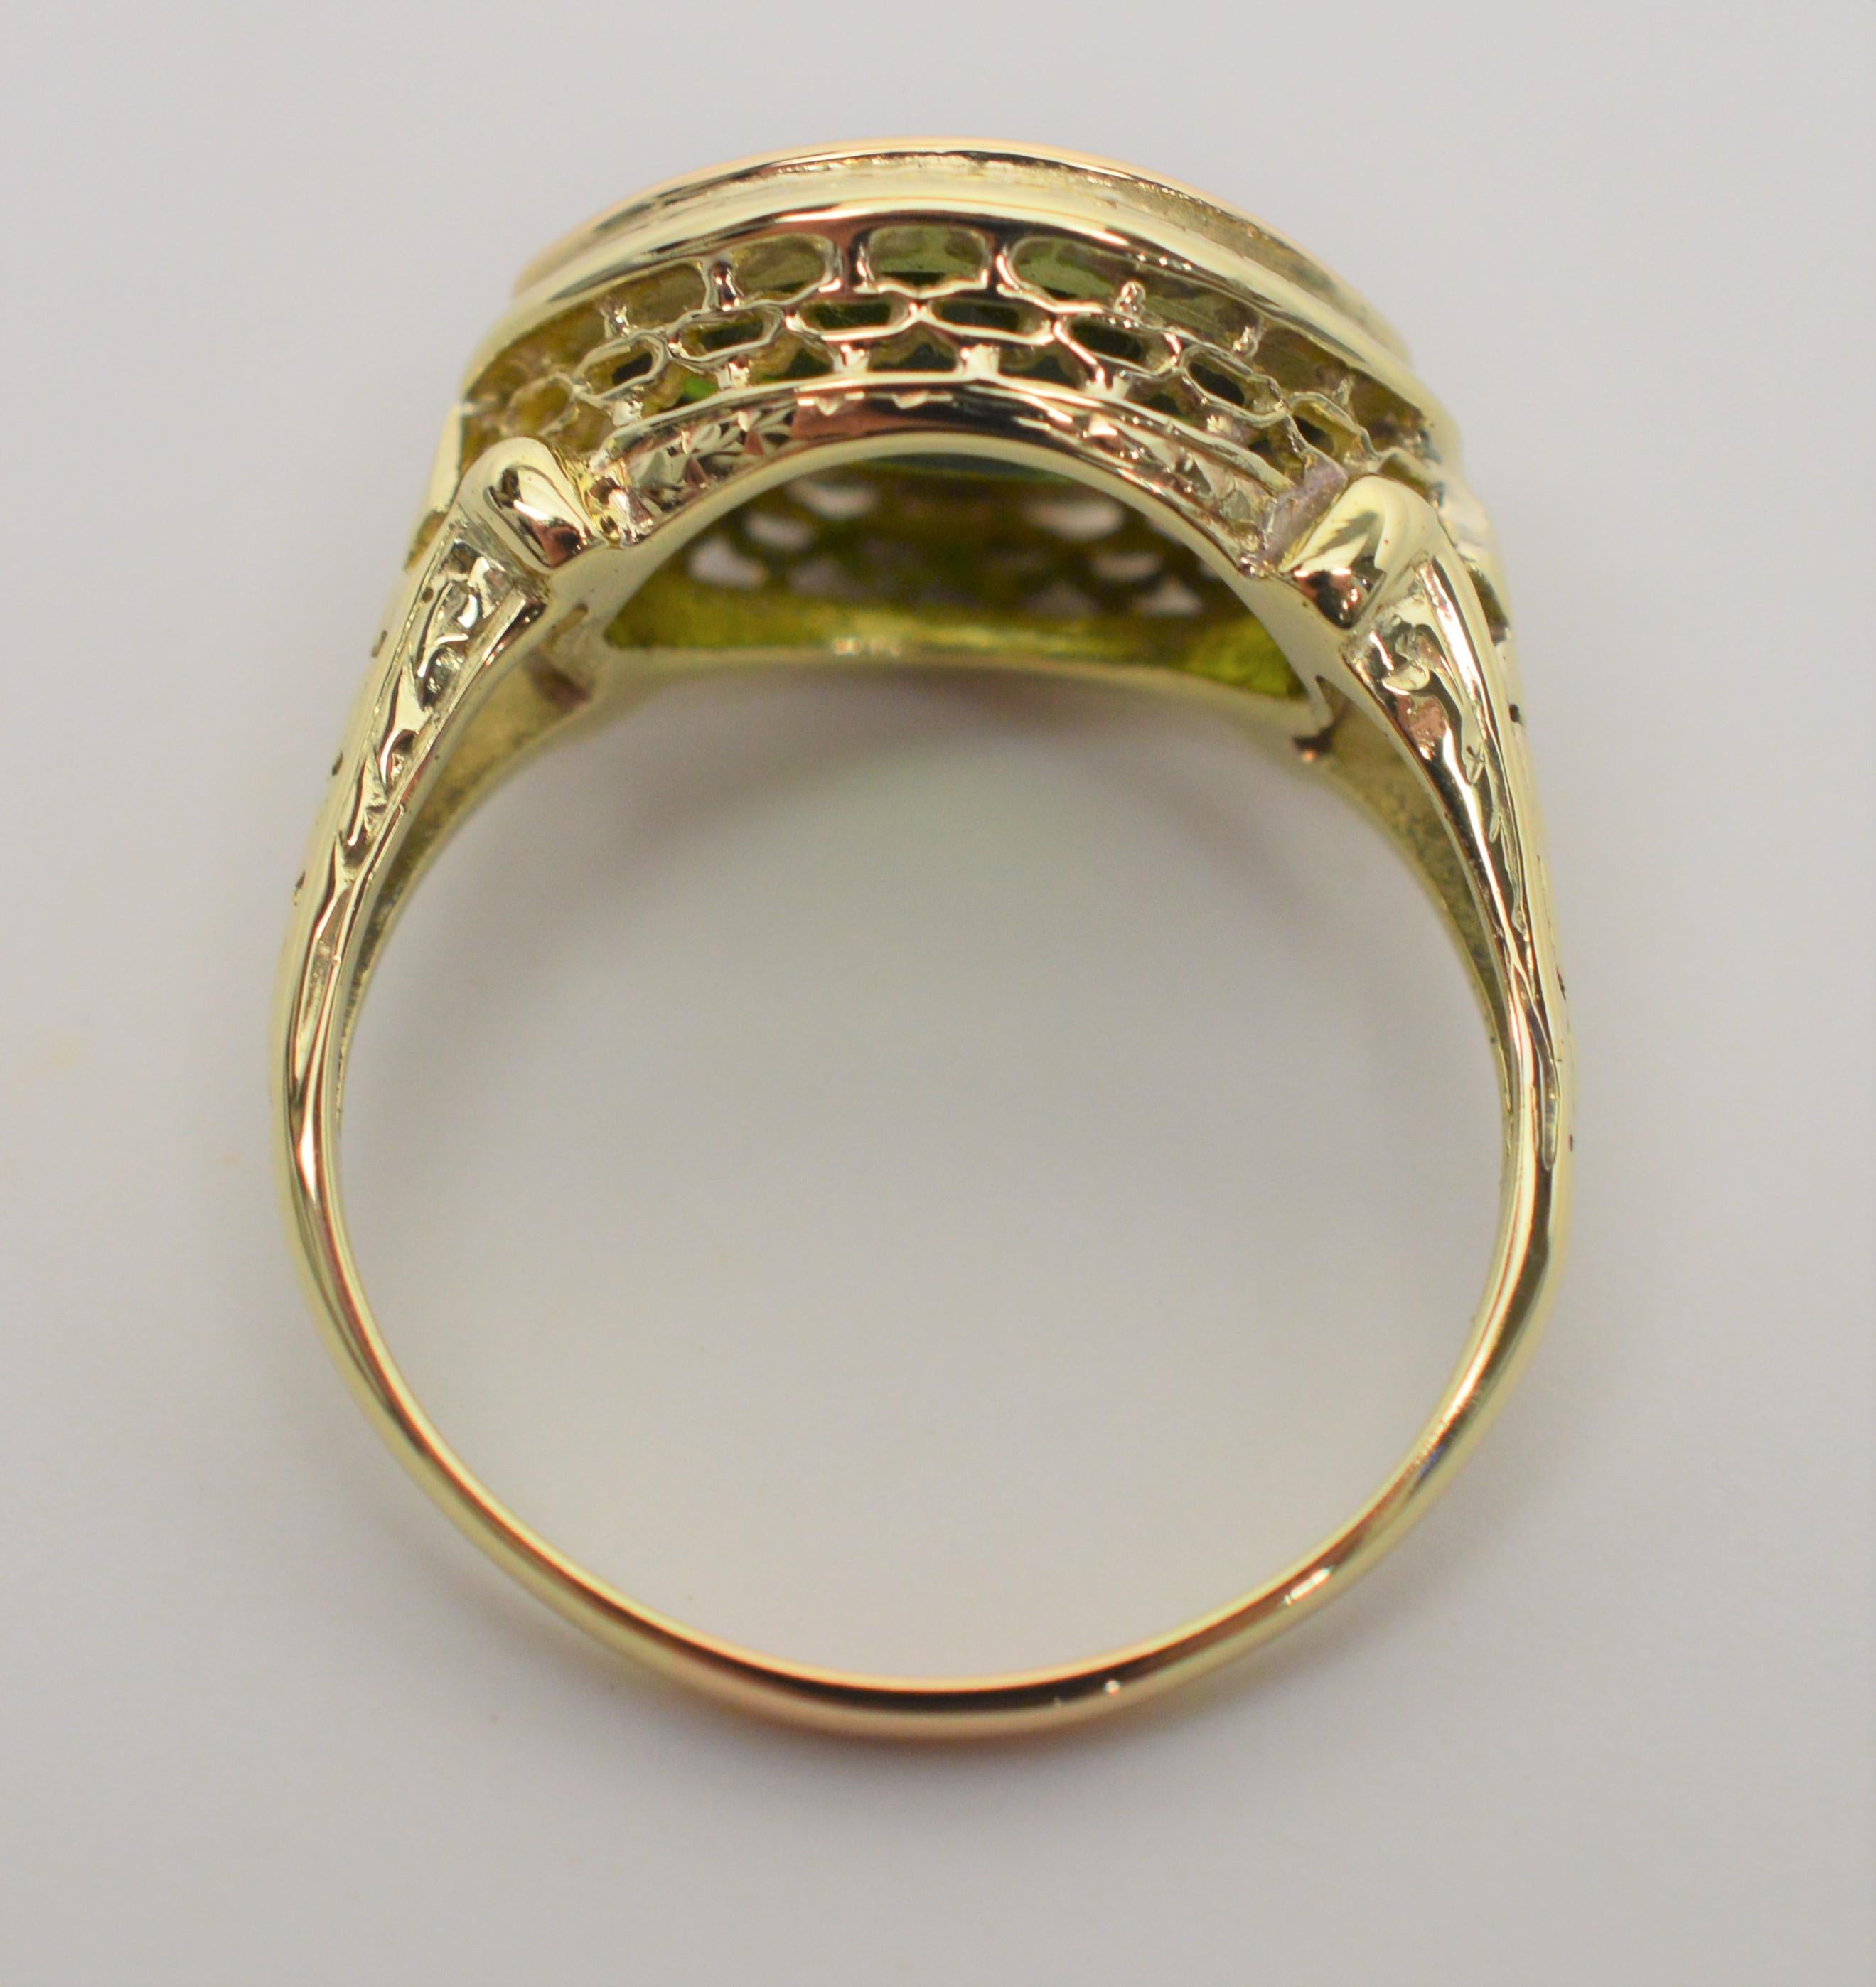 Antique Tourmaline Gemstone Yellow Gold Ring In Excellent Condition For Sale In Mount Kisco, NY